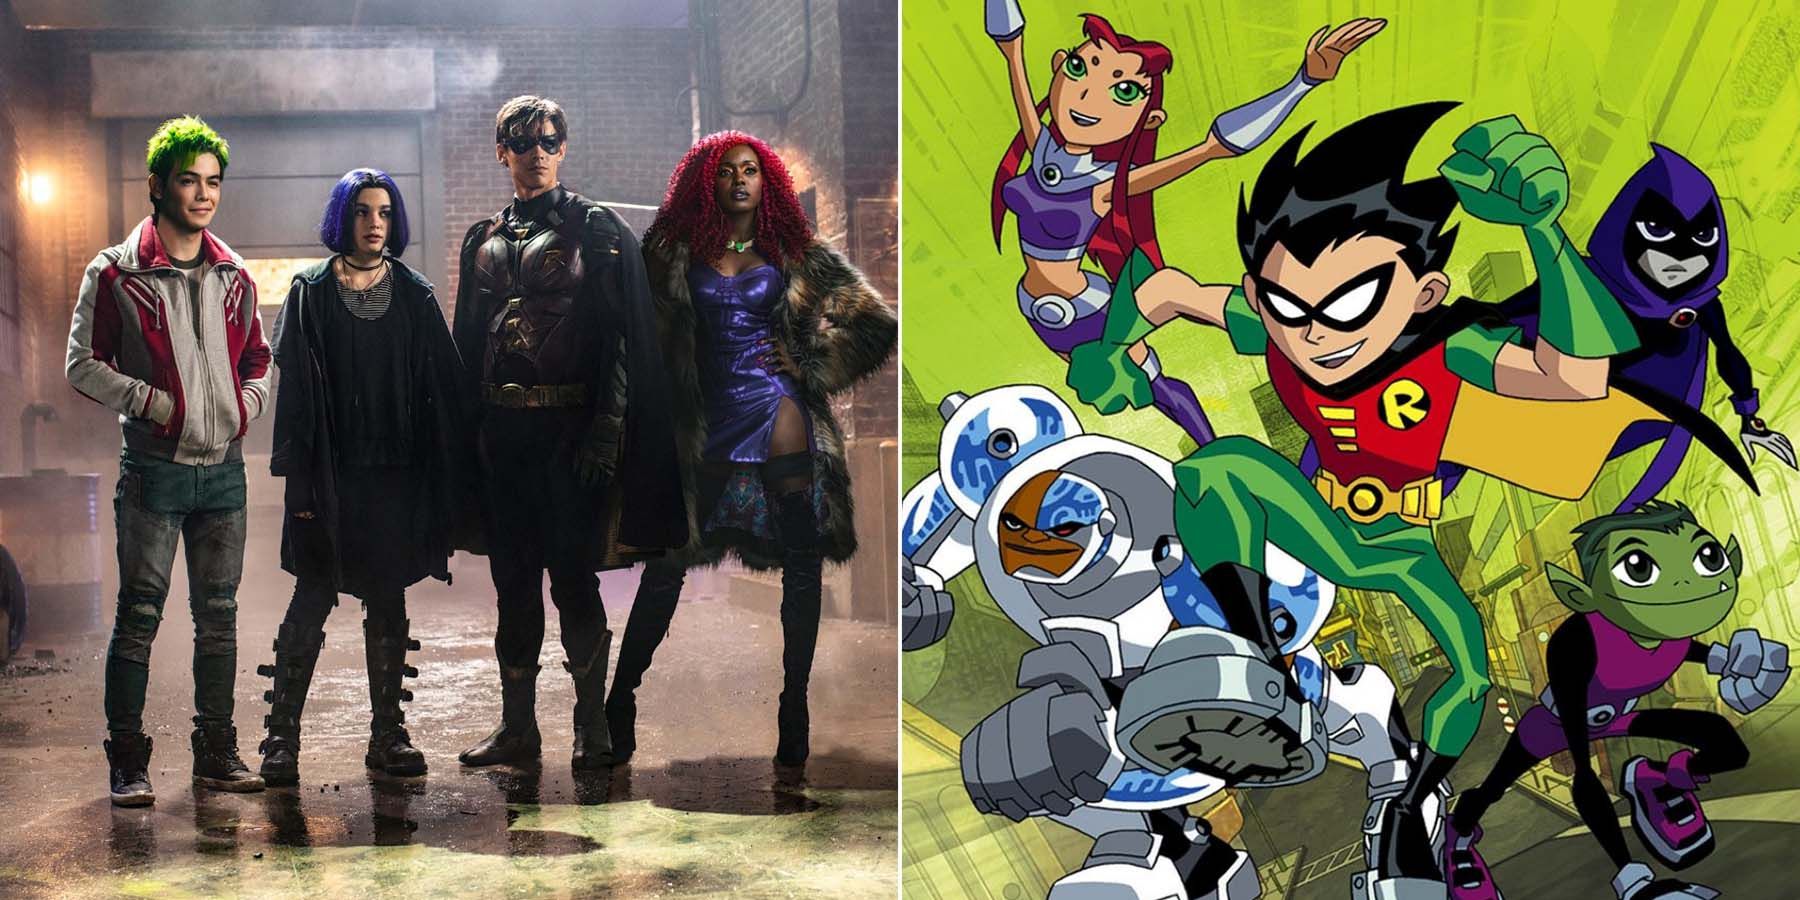 justice league vs teen titans full movie online for free